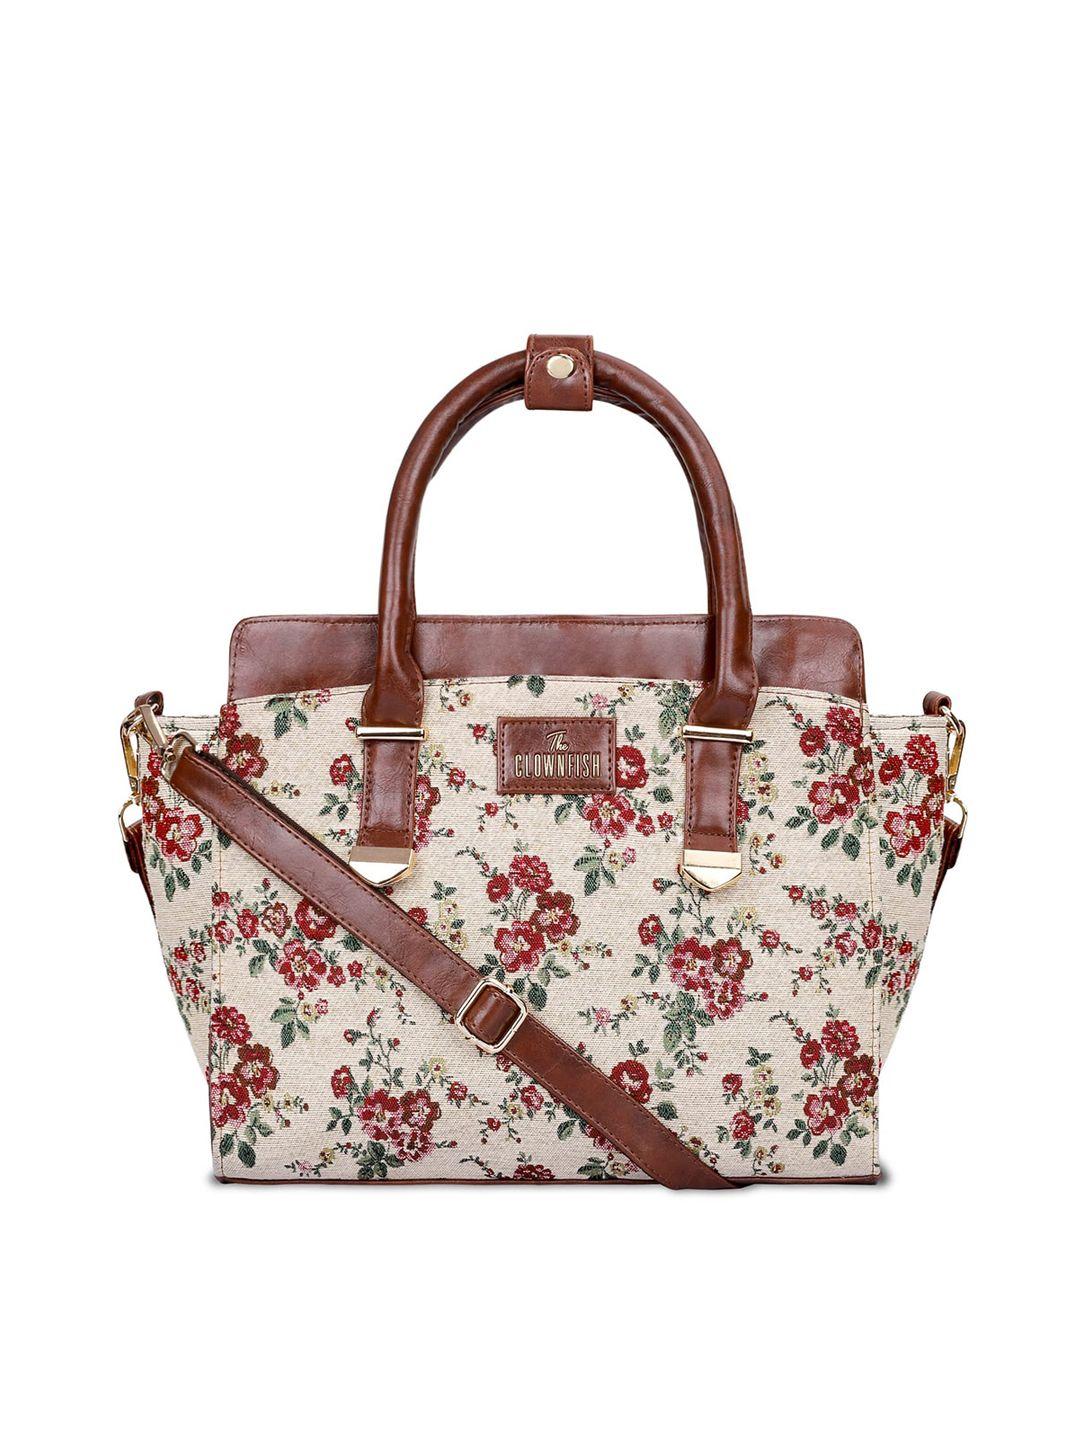 the-clownfish-floral-printed-oversized-structured-handheld-bag